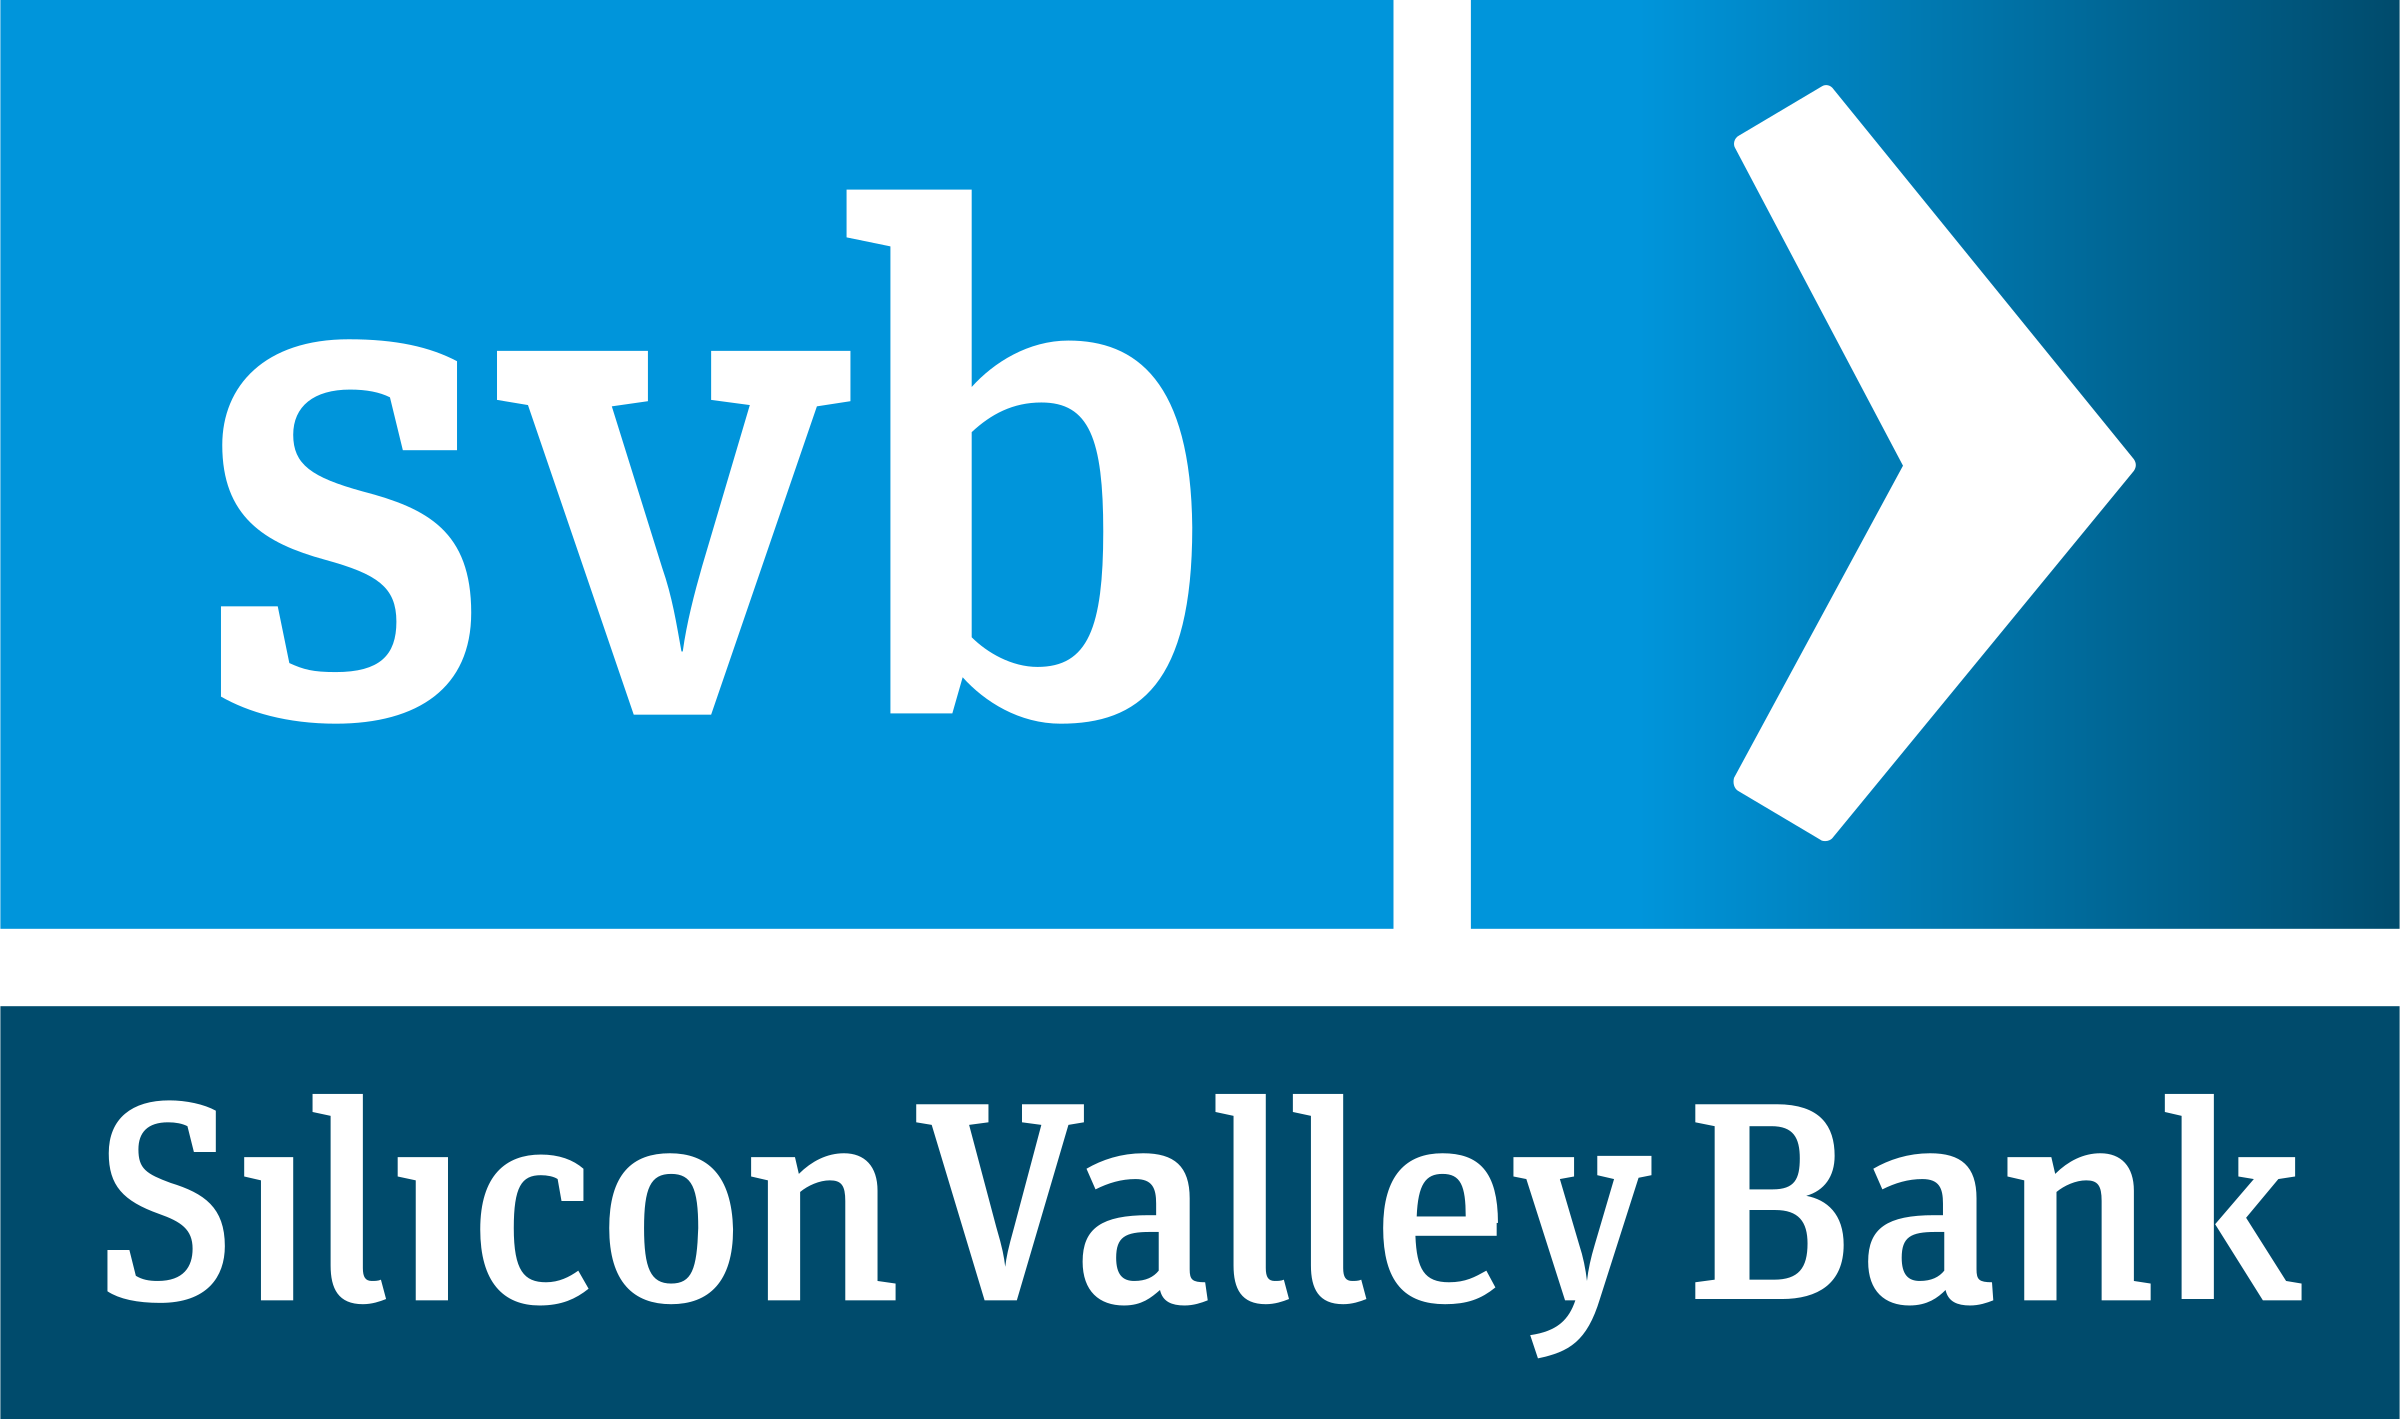 silicon-valley-bank-1-logo-png-transparent